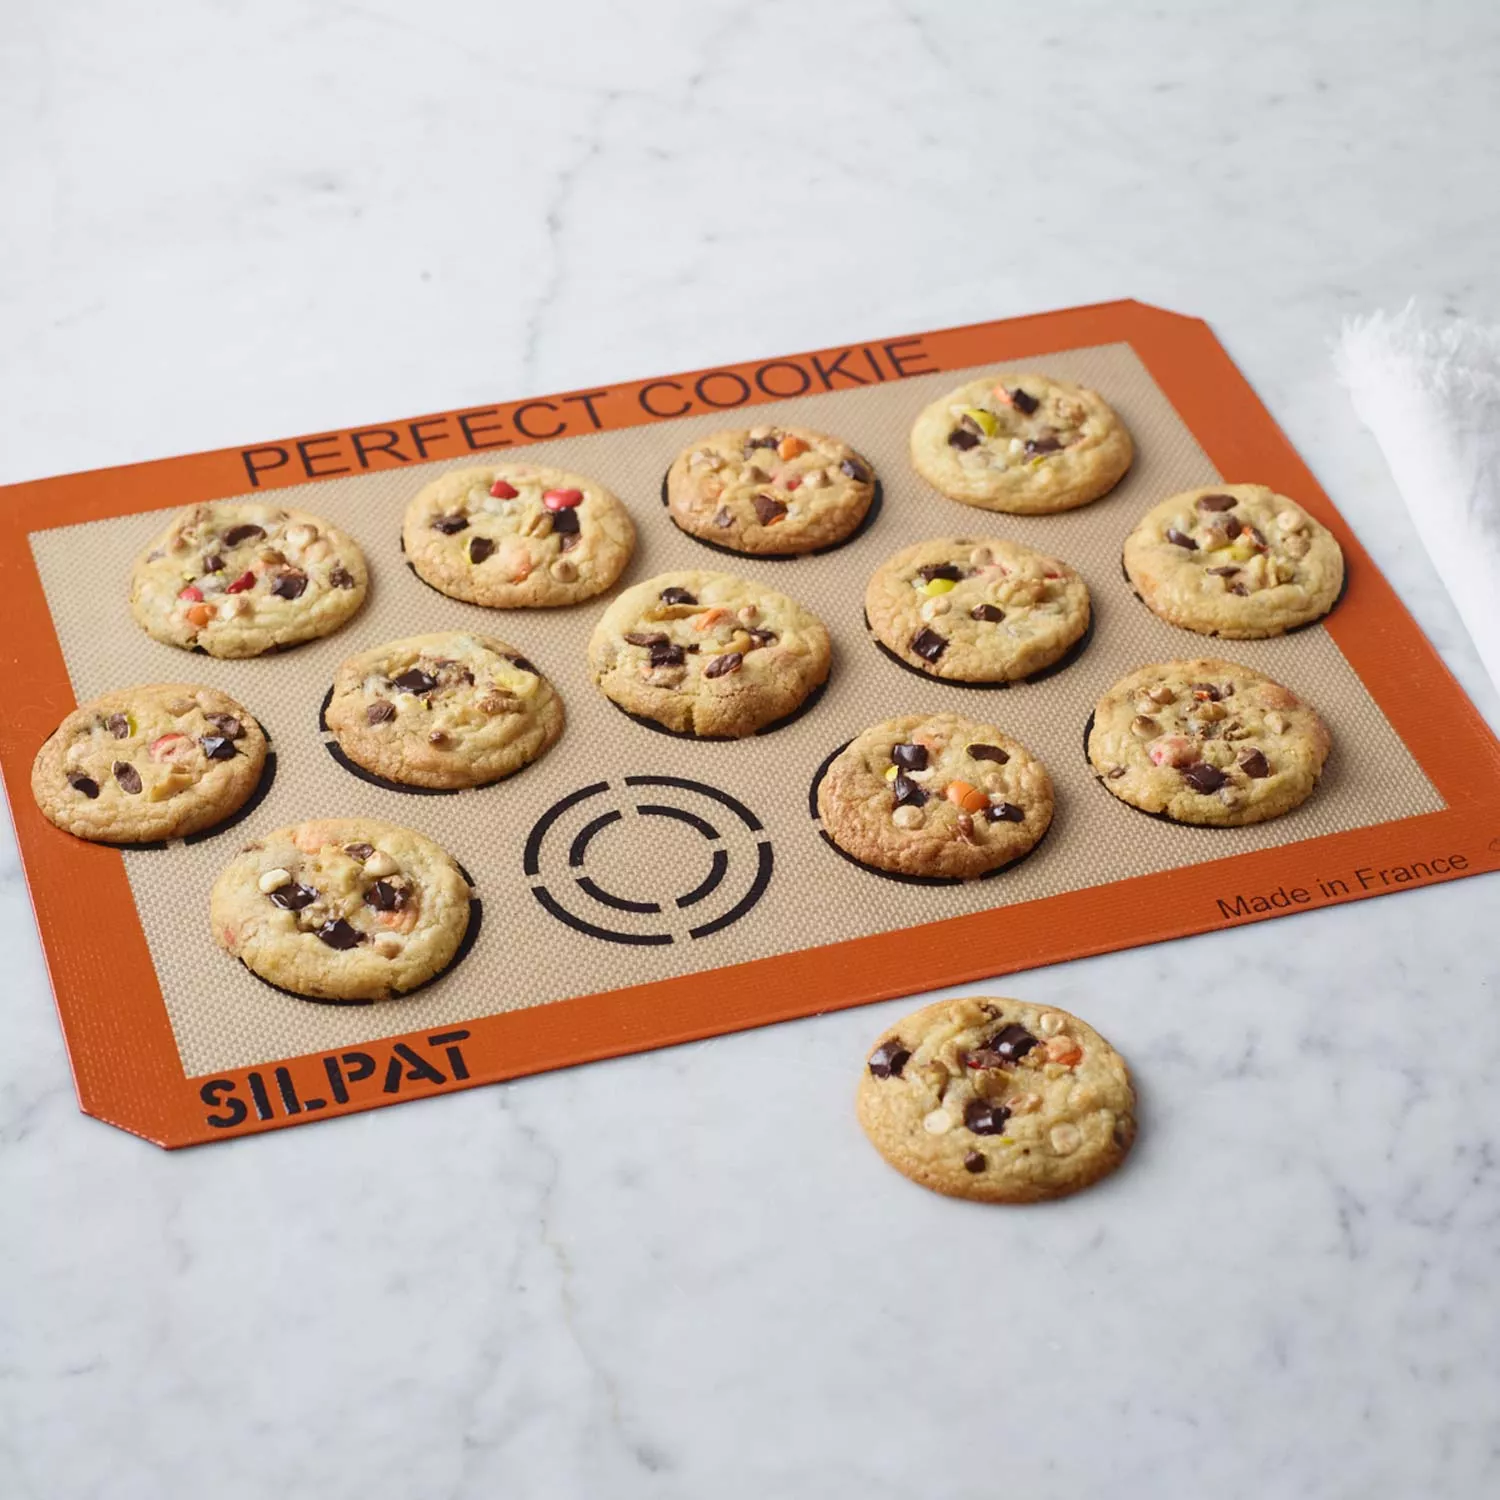 SILPAT® 16 1/2 x 24 1/2 Full-Size Silicone Non-Stick Baking Mat